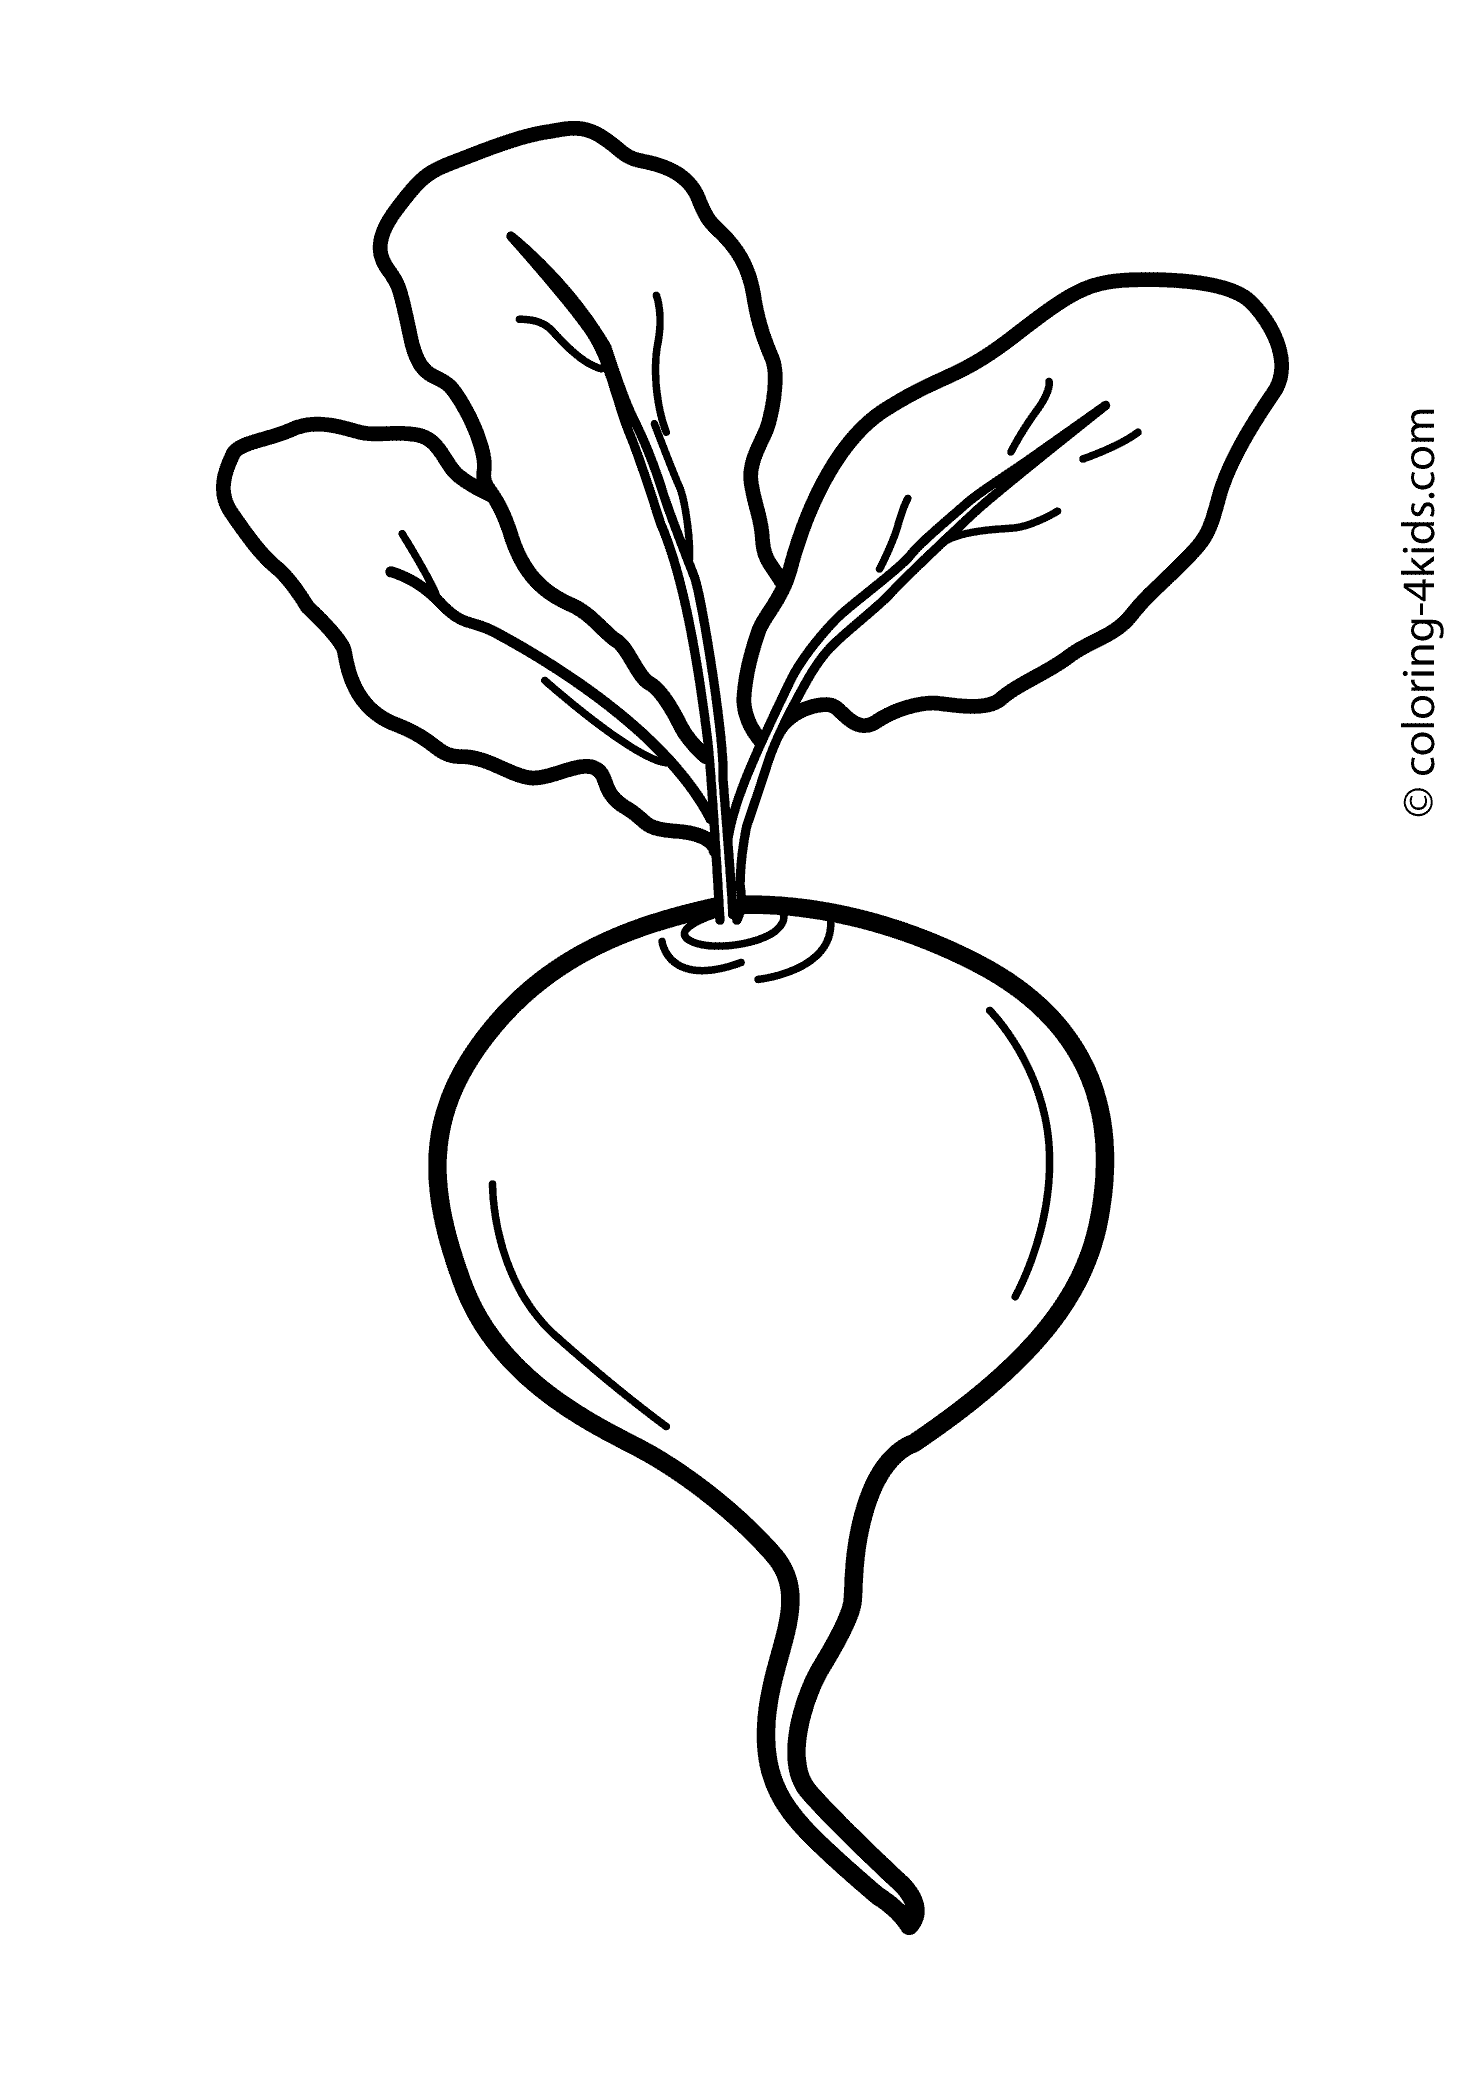 Radish Drawing | Free download on ClipArtMag